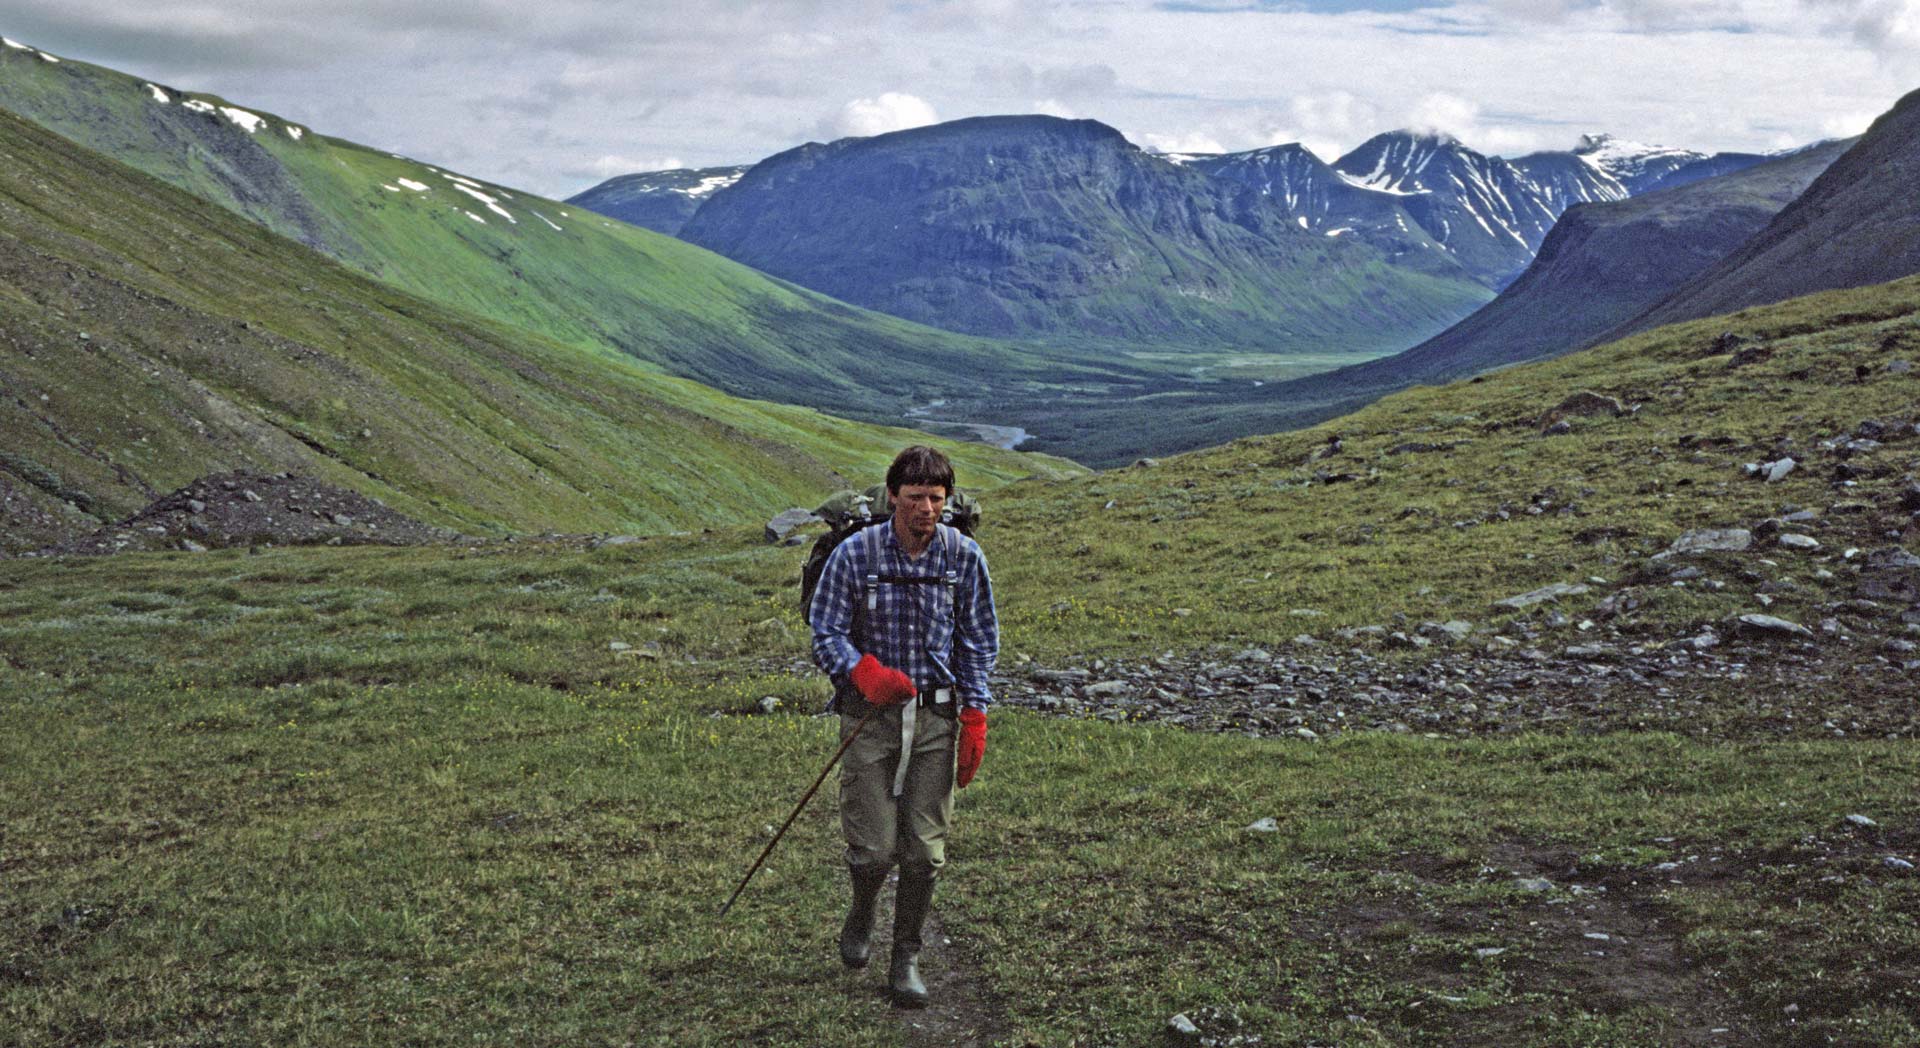 <span lang="en">Me in Alkavagge, with Låddepakte and the Rapa Valley in the background. From walk through Sarek 1987</span>